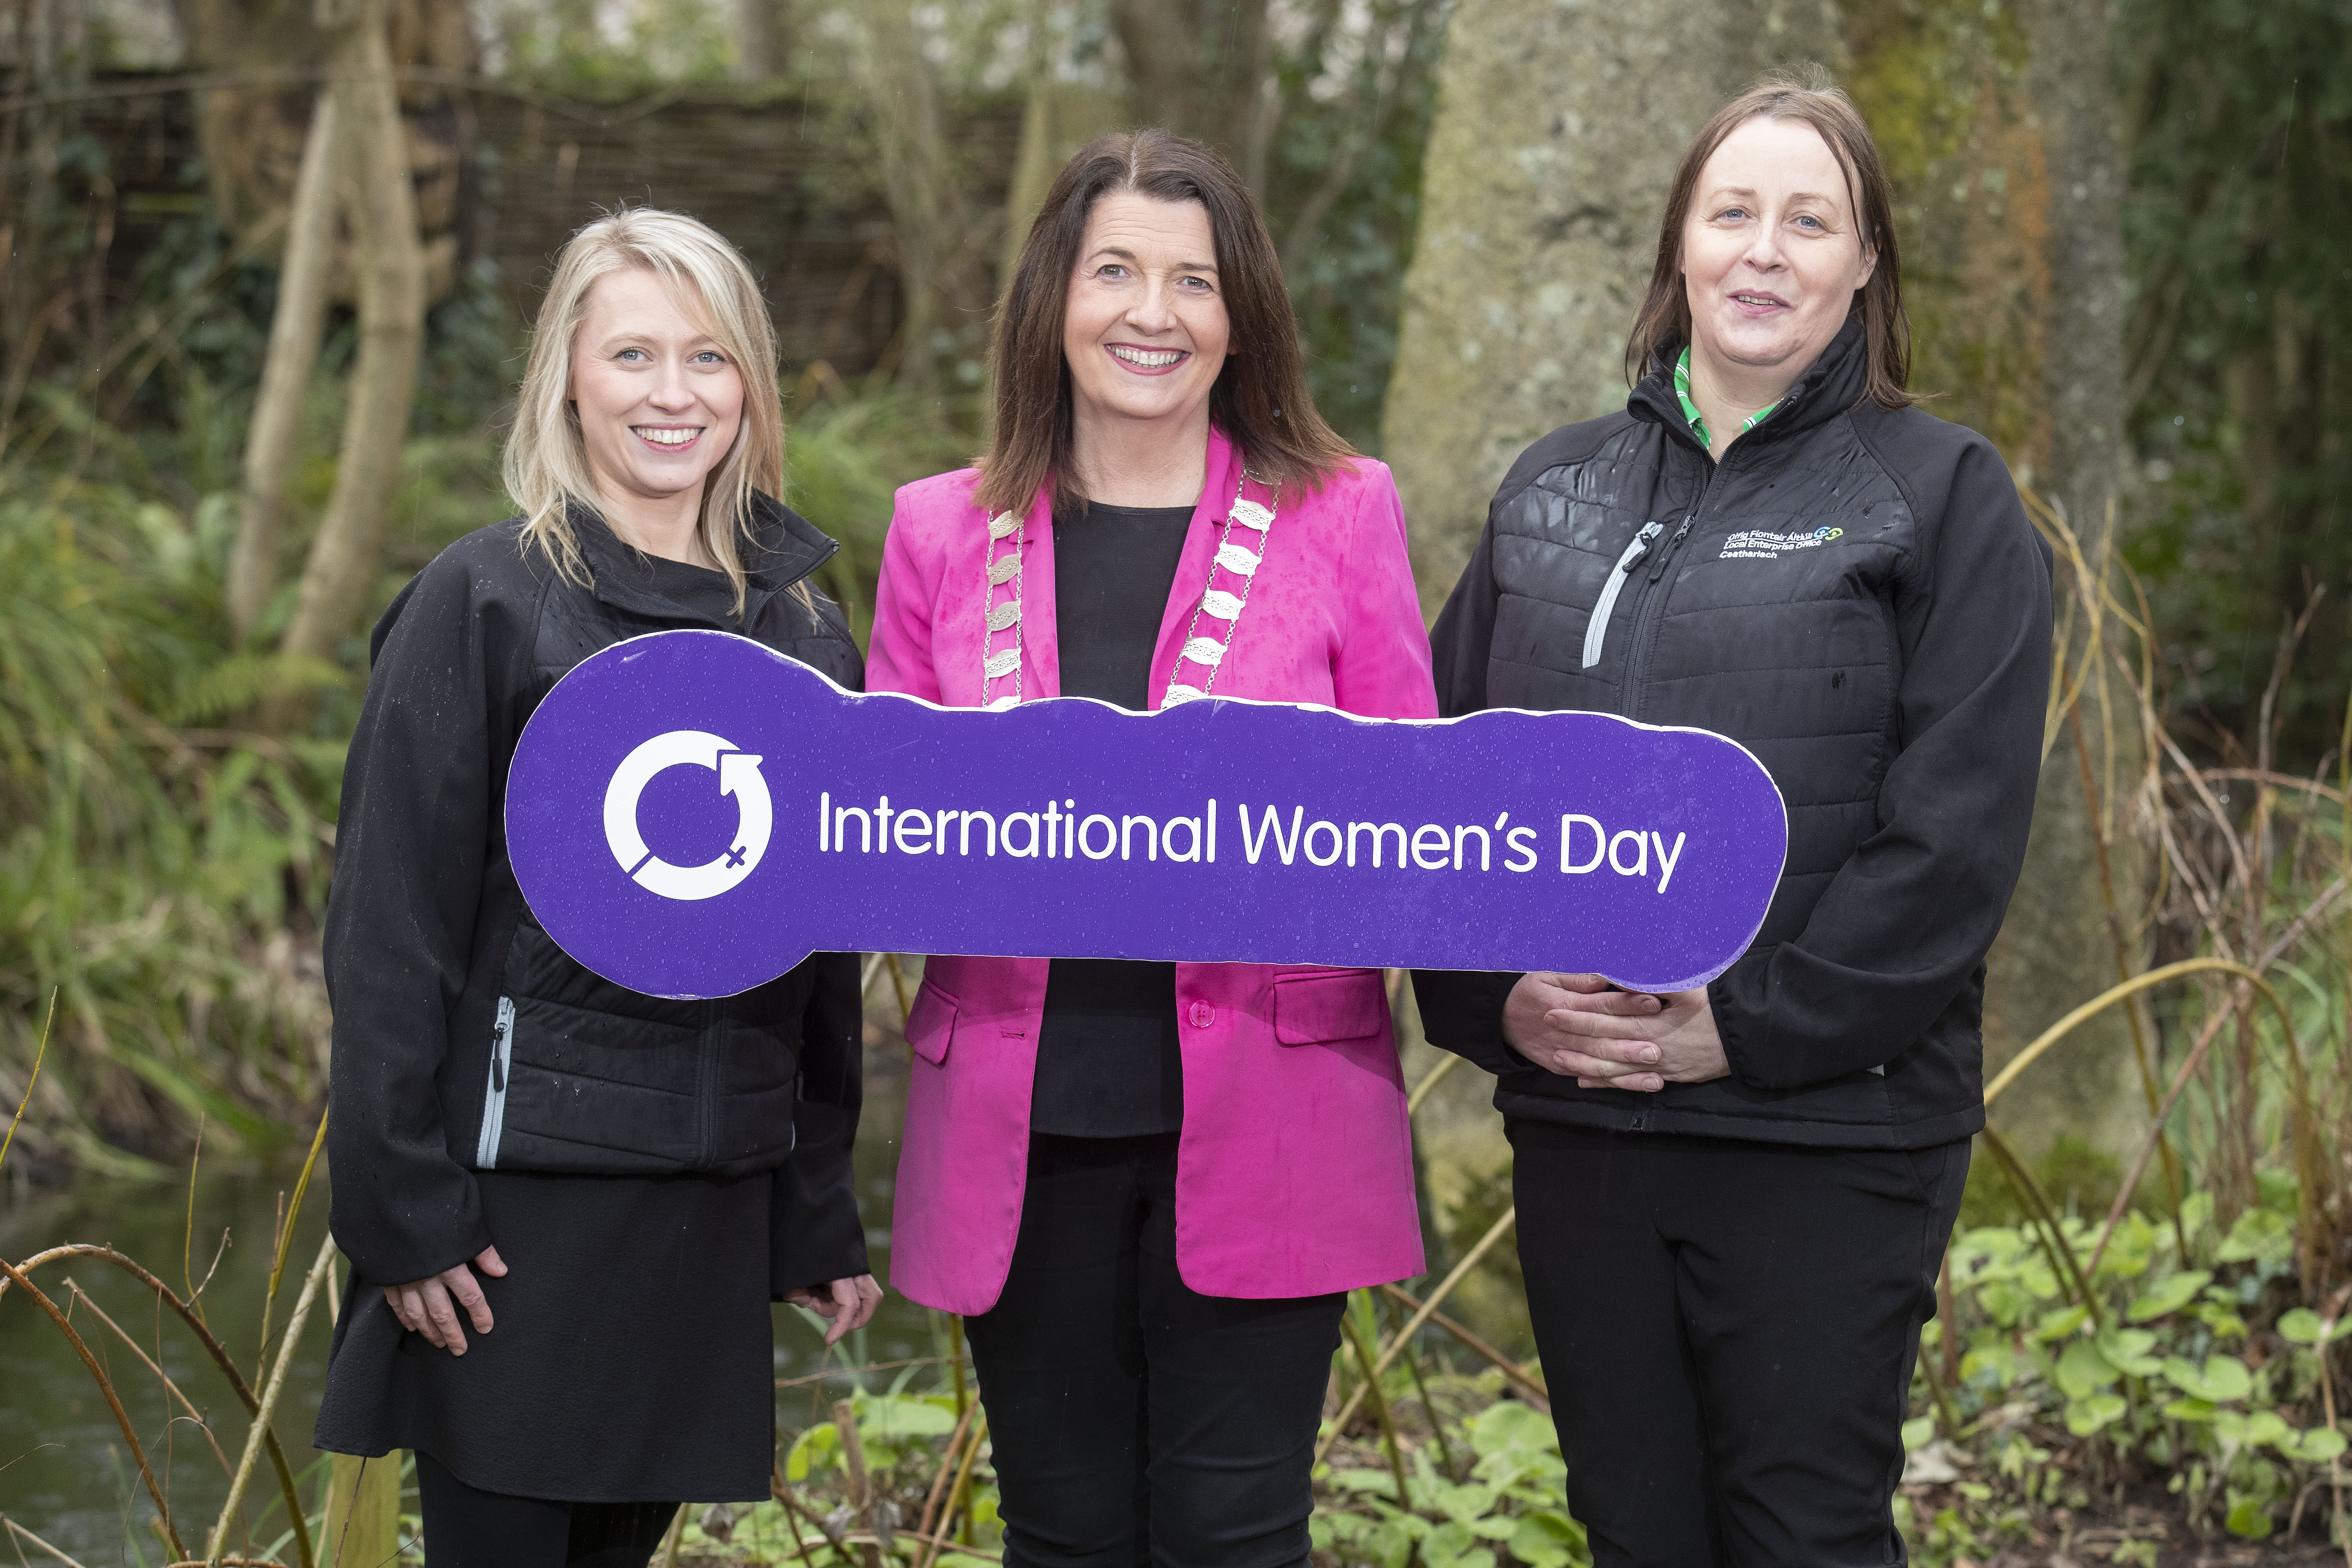 Carlow County invited to come together to celebrate International Women’s Day